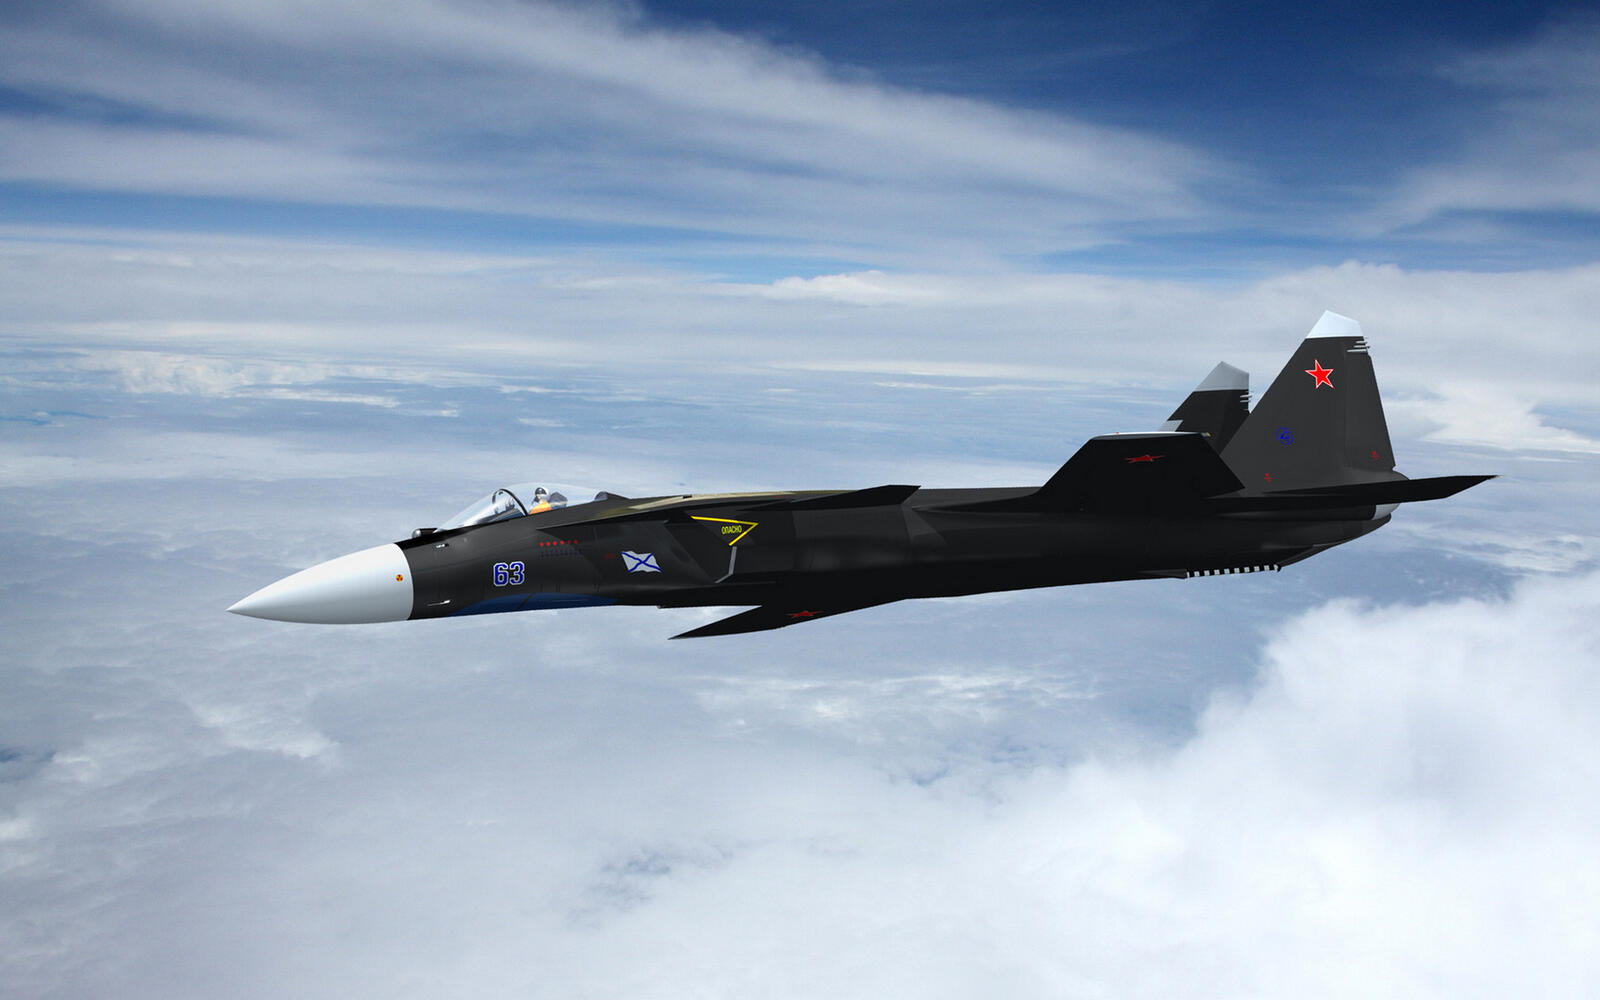 Wallpapers airplane fighter black on the desktop